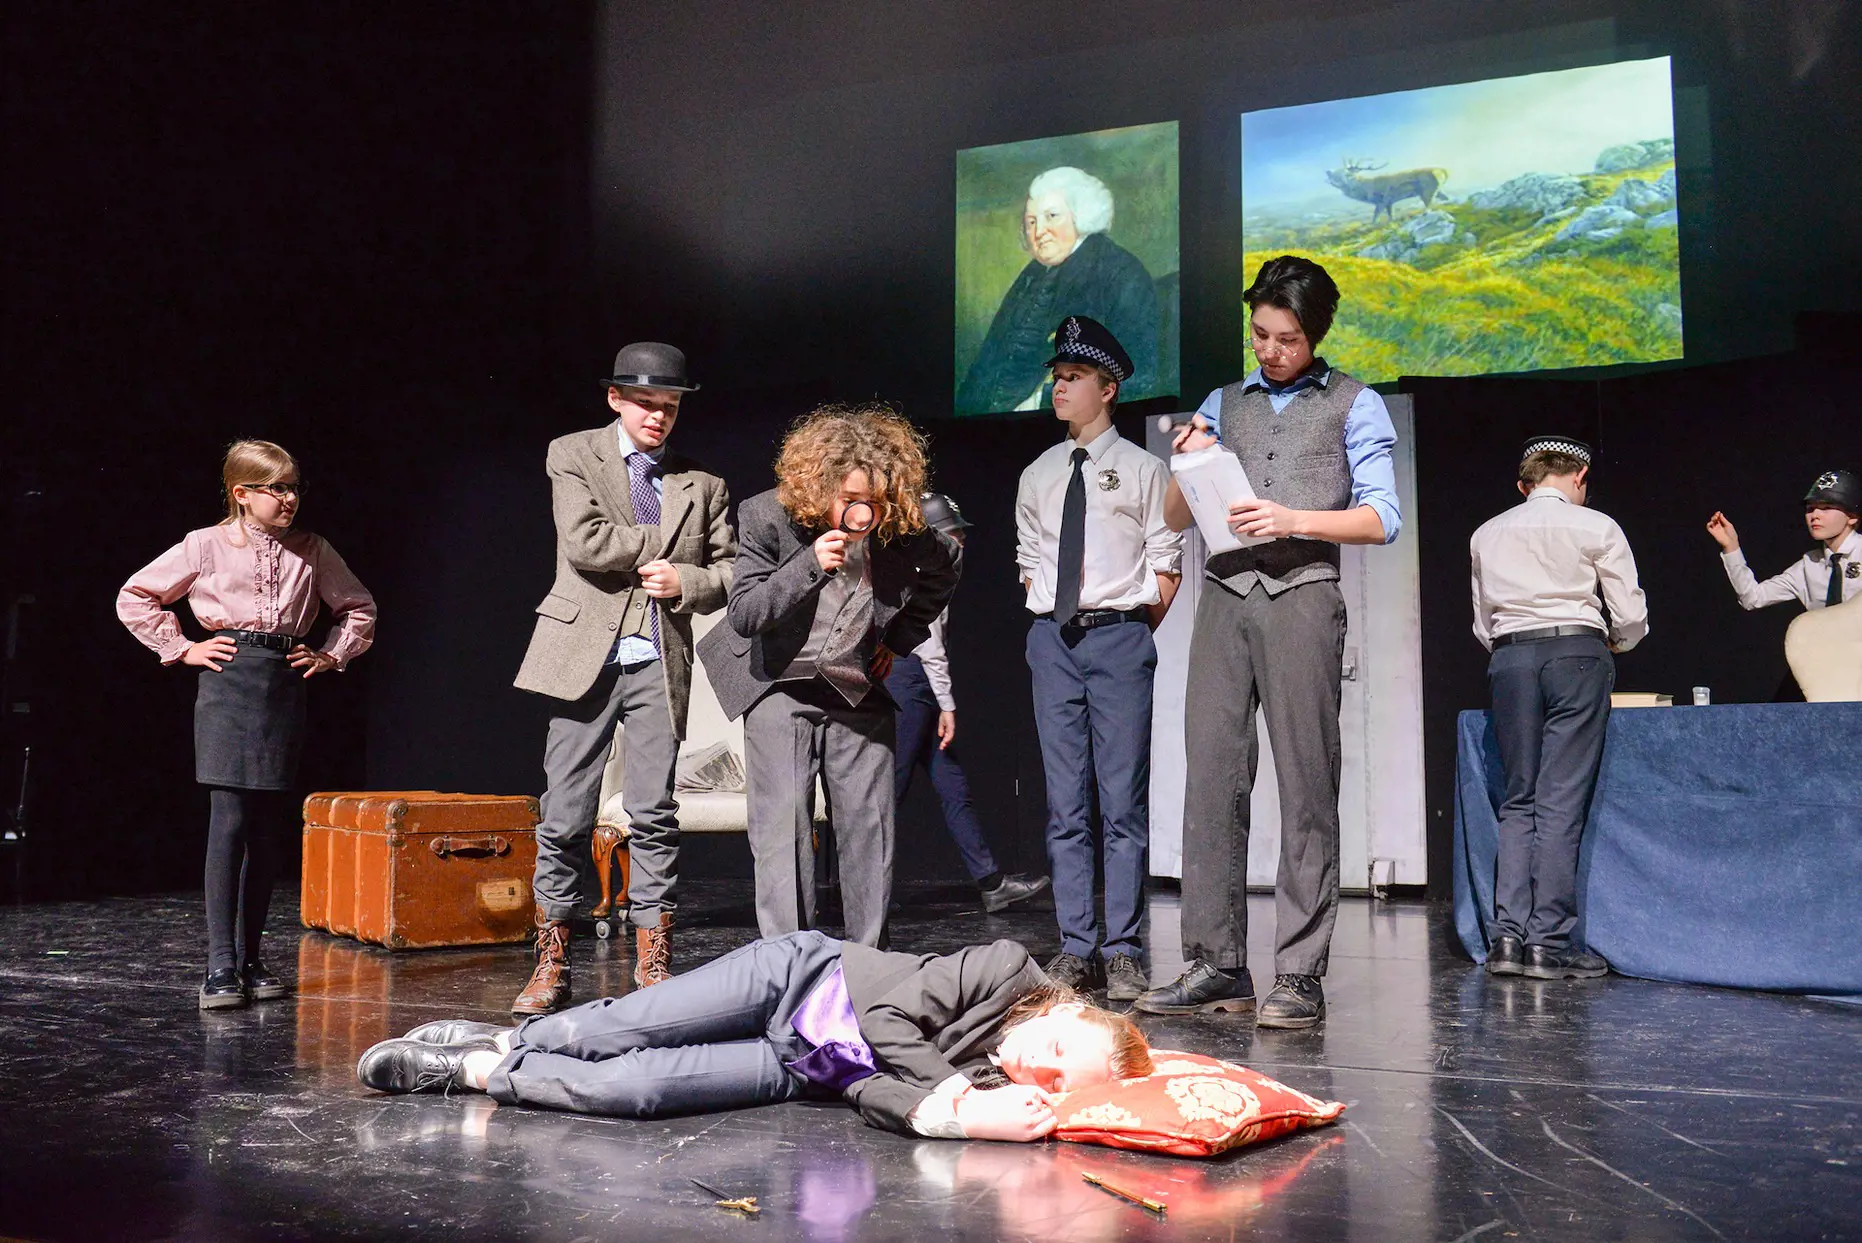 Senior pupils performing a play at Ibstock Place School, a private school near Richmond, Barnes, Putney, Kingston, and Wandsworth.